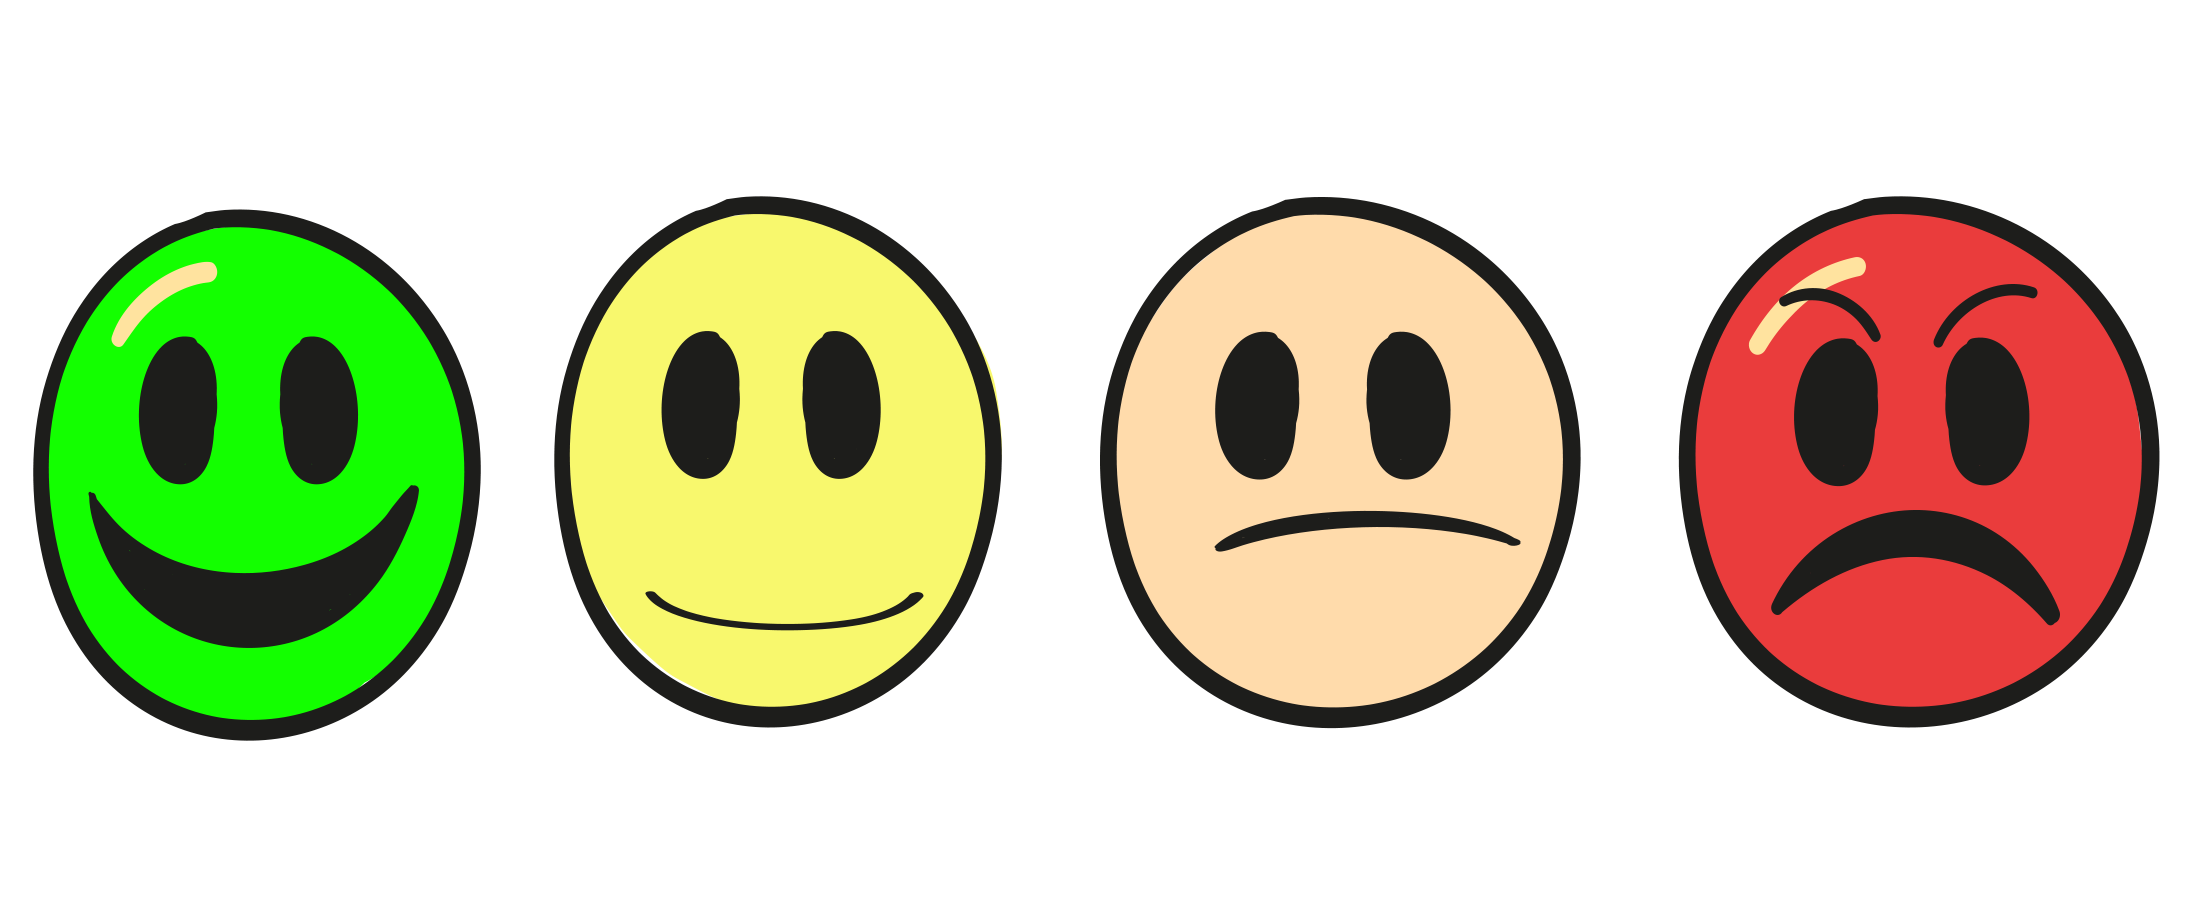 Are Your Customers Happy Or Not Survey Stance Gives Instant Feedback - 